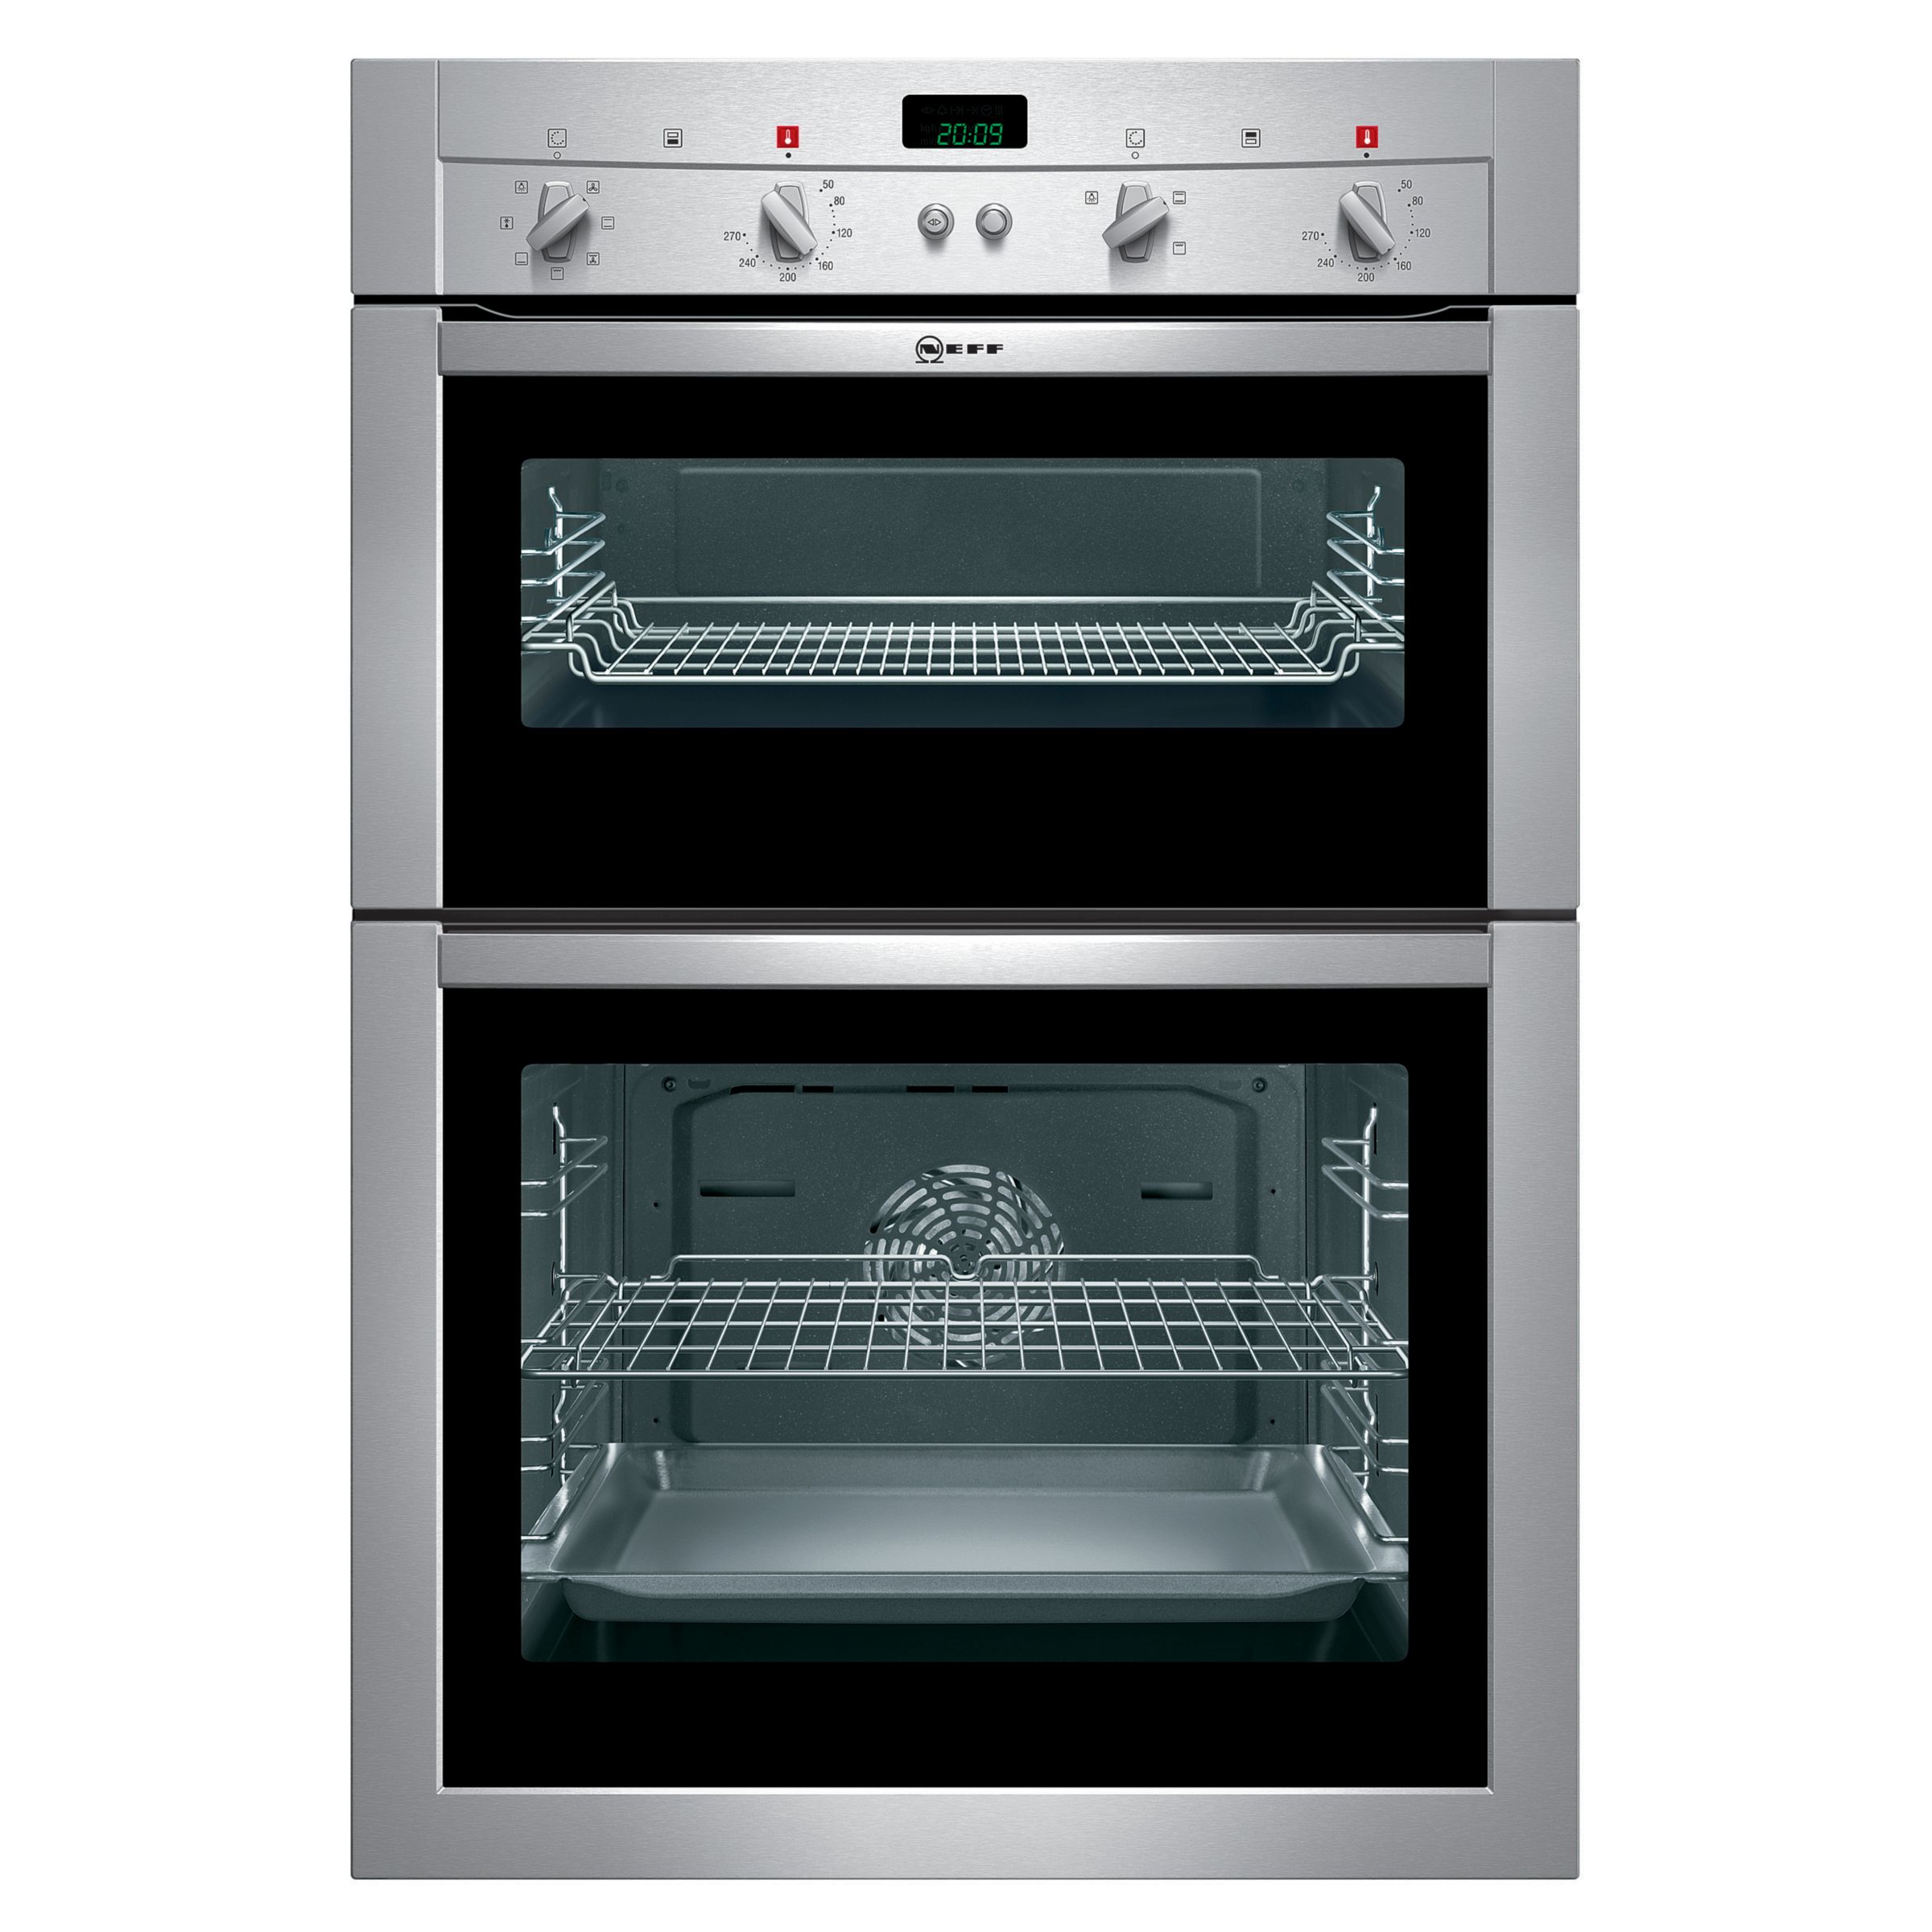 Neff U14M62N0GB Double Electric Oven, Stainless Steel at John Lewis